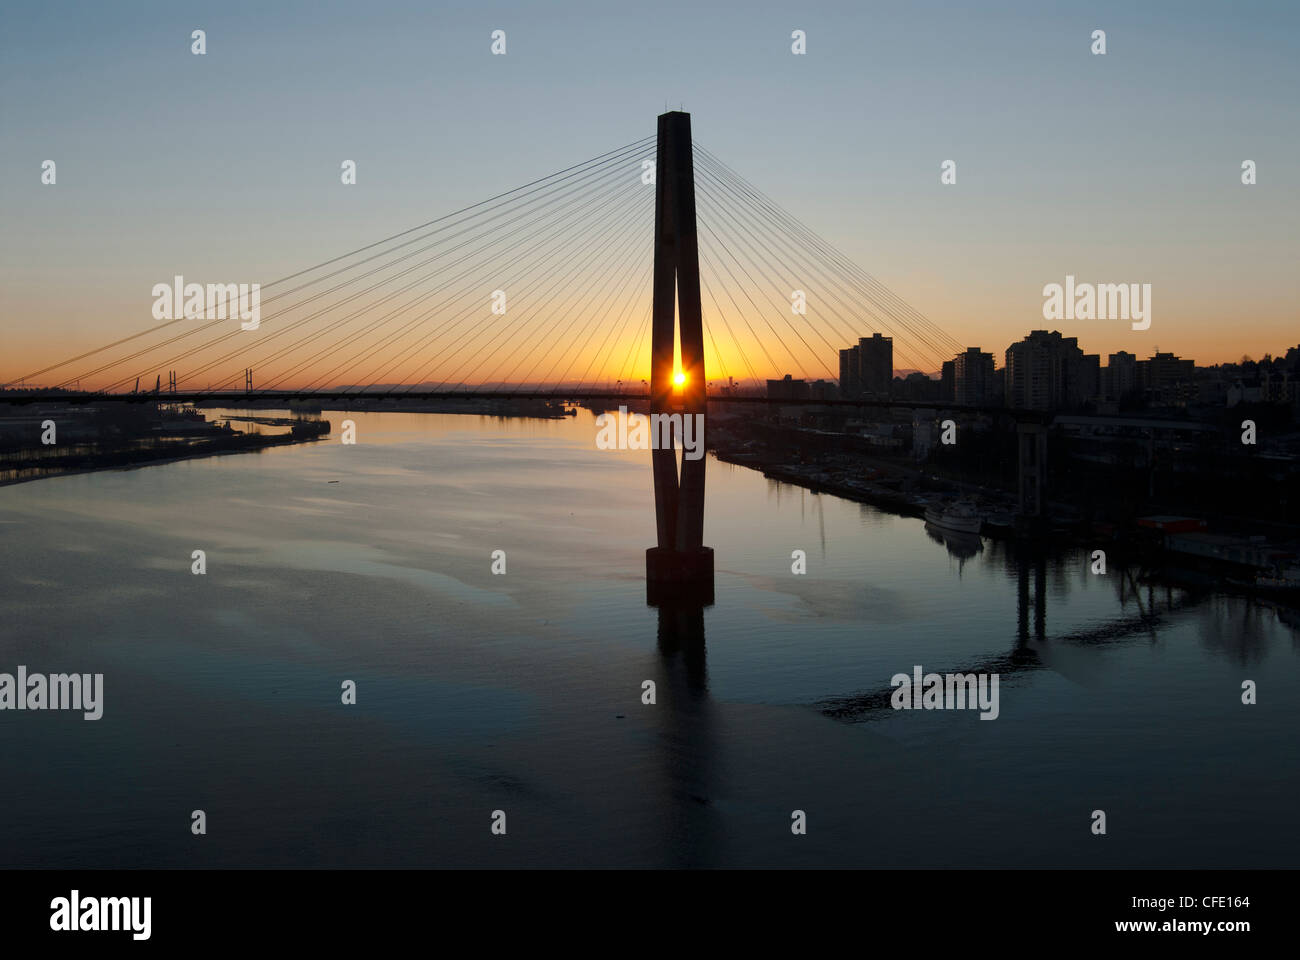 Sunset behind the Skytrain Bridge and the Fraser River in New Westminster, British Columbia, Canada. Stock Photo